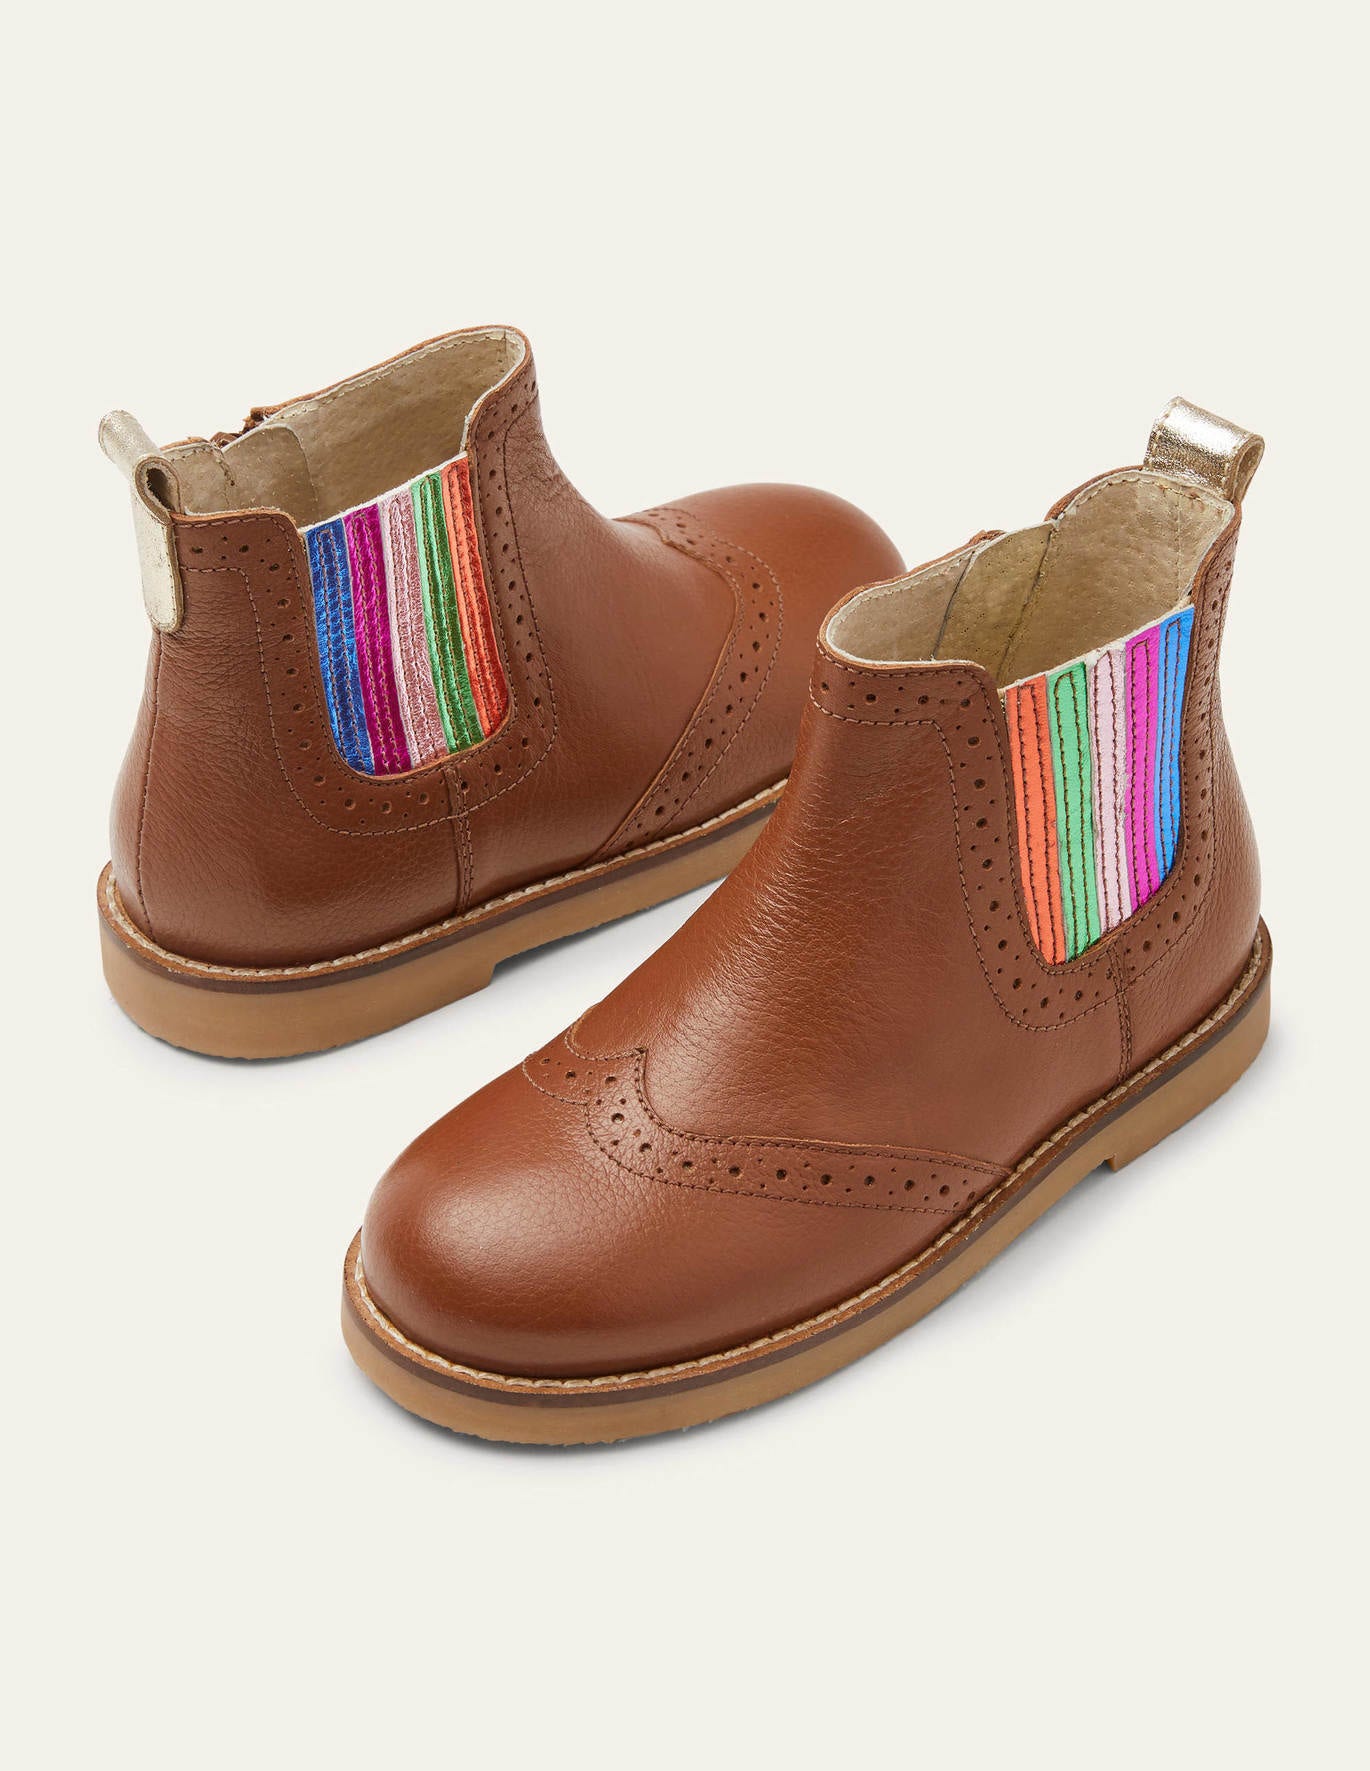 Boden Leather Chelsea Boots - Tan Rainbow